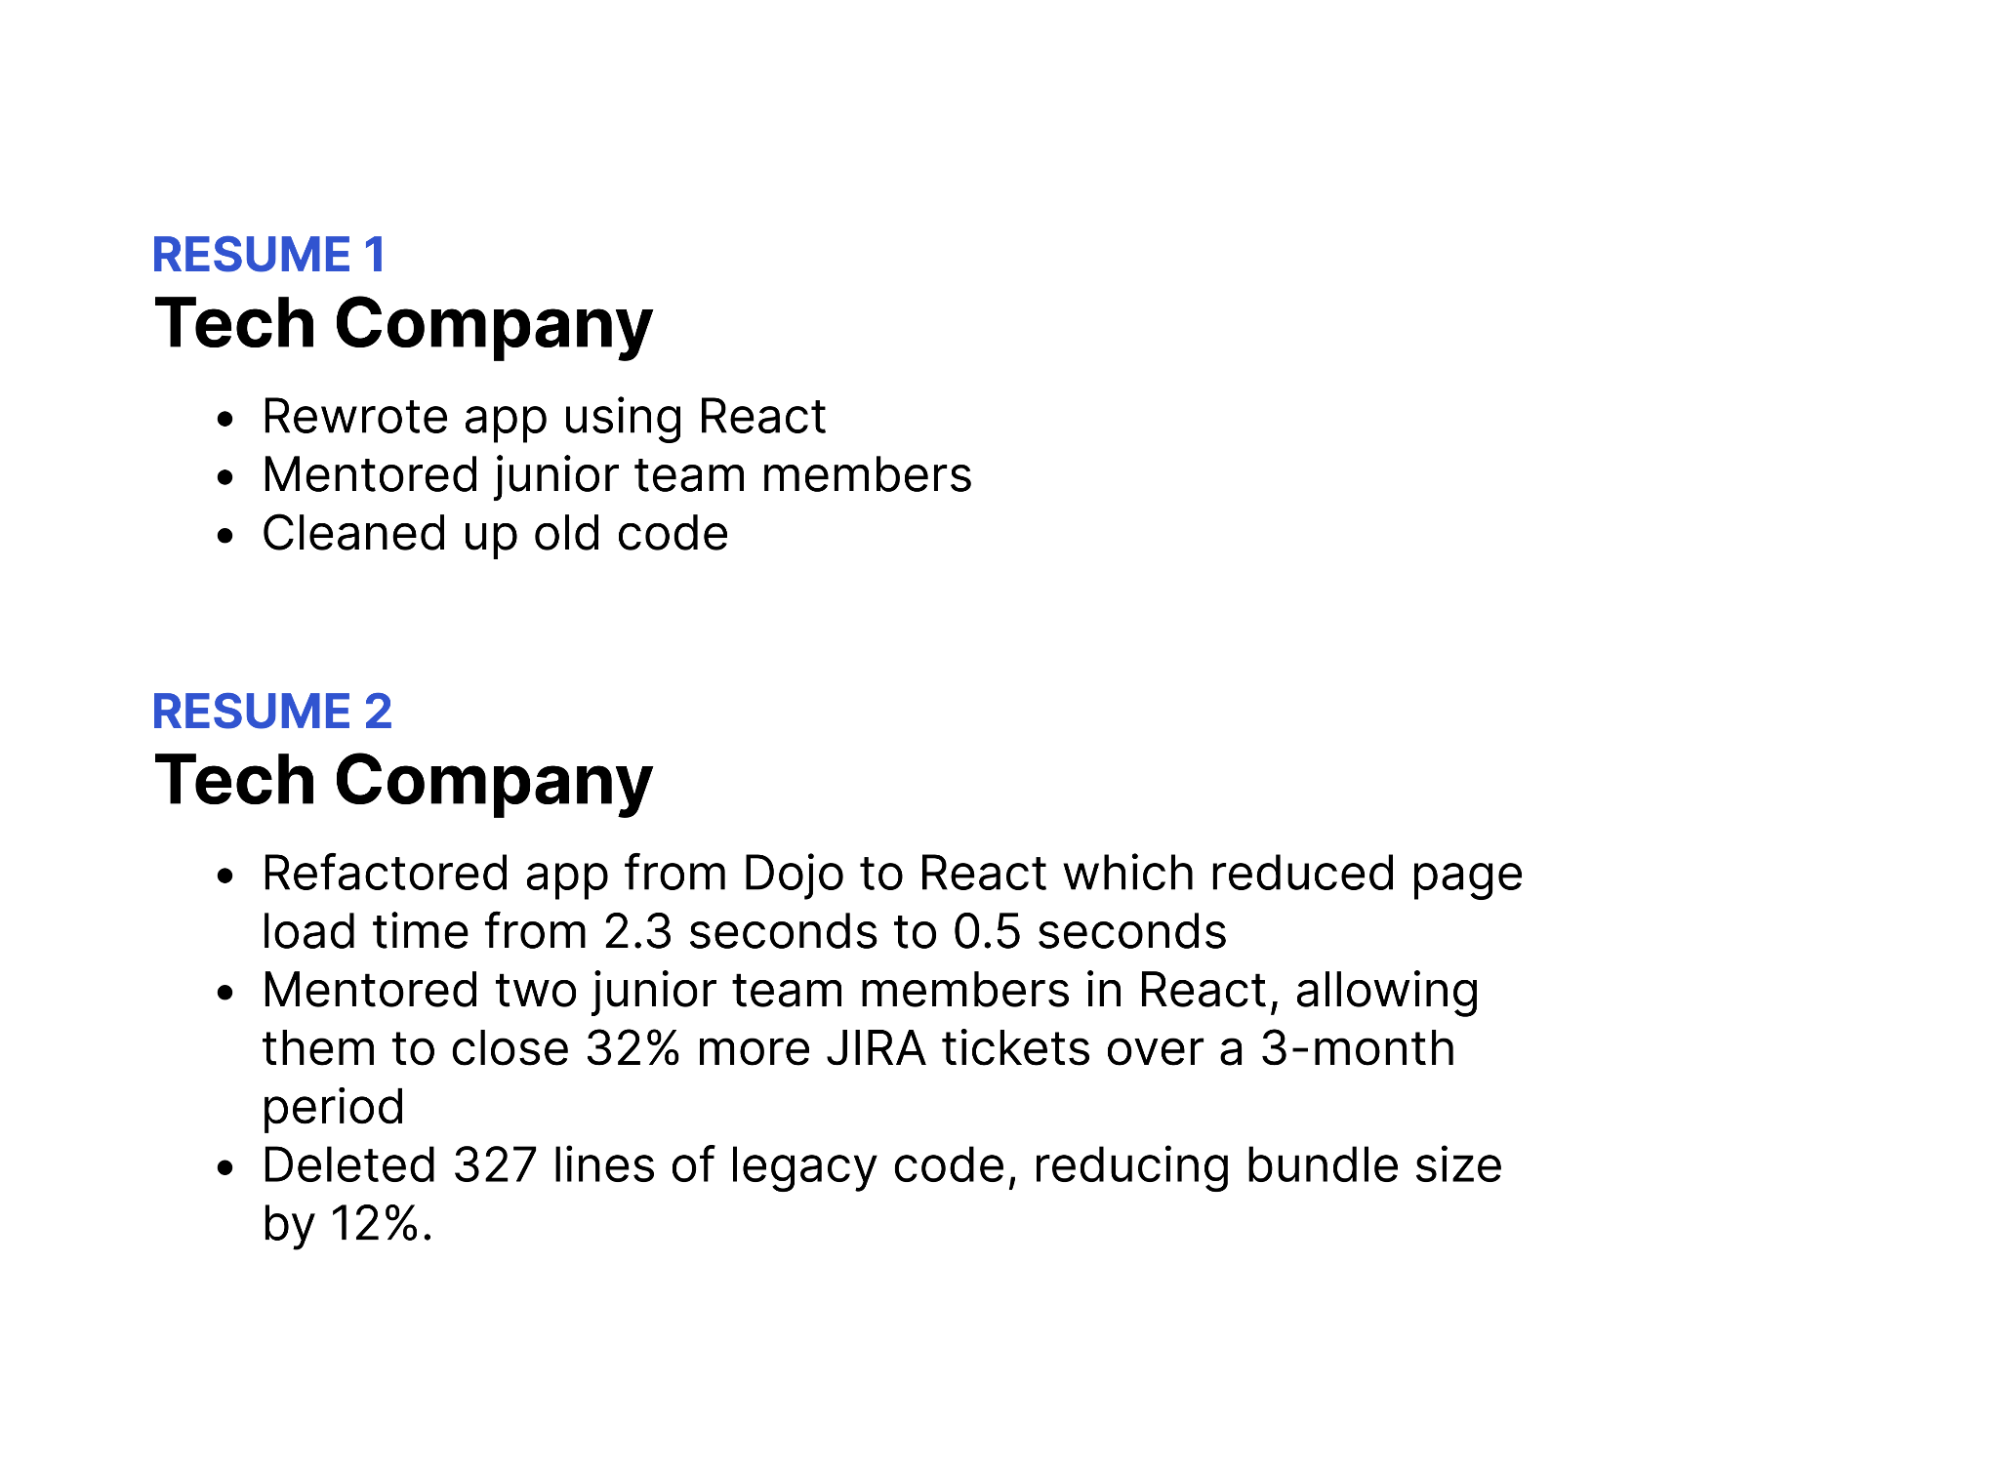 Resume 1 at Tech Company: - Rewrote app using React - Mentored junior team members - Cleaned up old code. Resume 2 at Tech Company: - Refactored app from Dojo to React which reduced page load time from 2.3 seconds to 0.5 seconds - Mentored two junior team members in React, allowing them to close 32% more JIRA tickets over a 3-month period - Deleted 327 lines of legacy code, reducing bundle size by 12%.